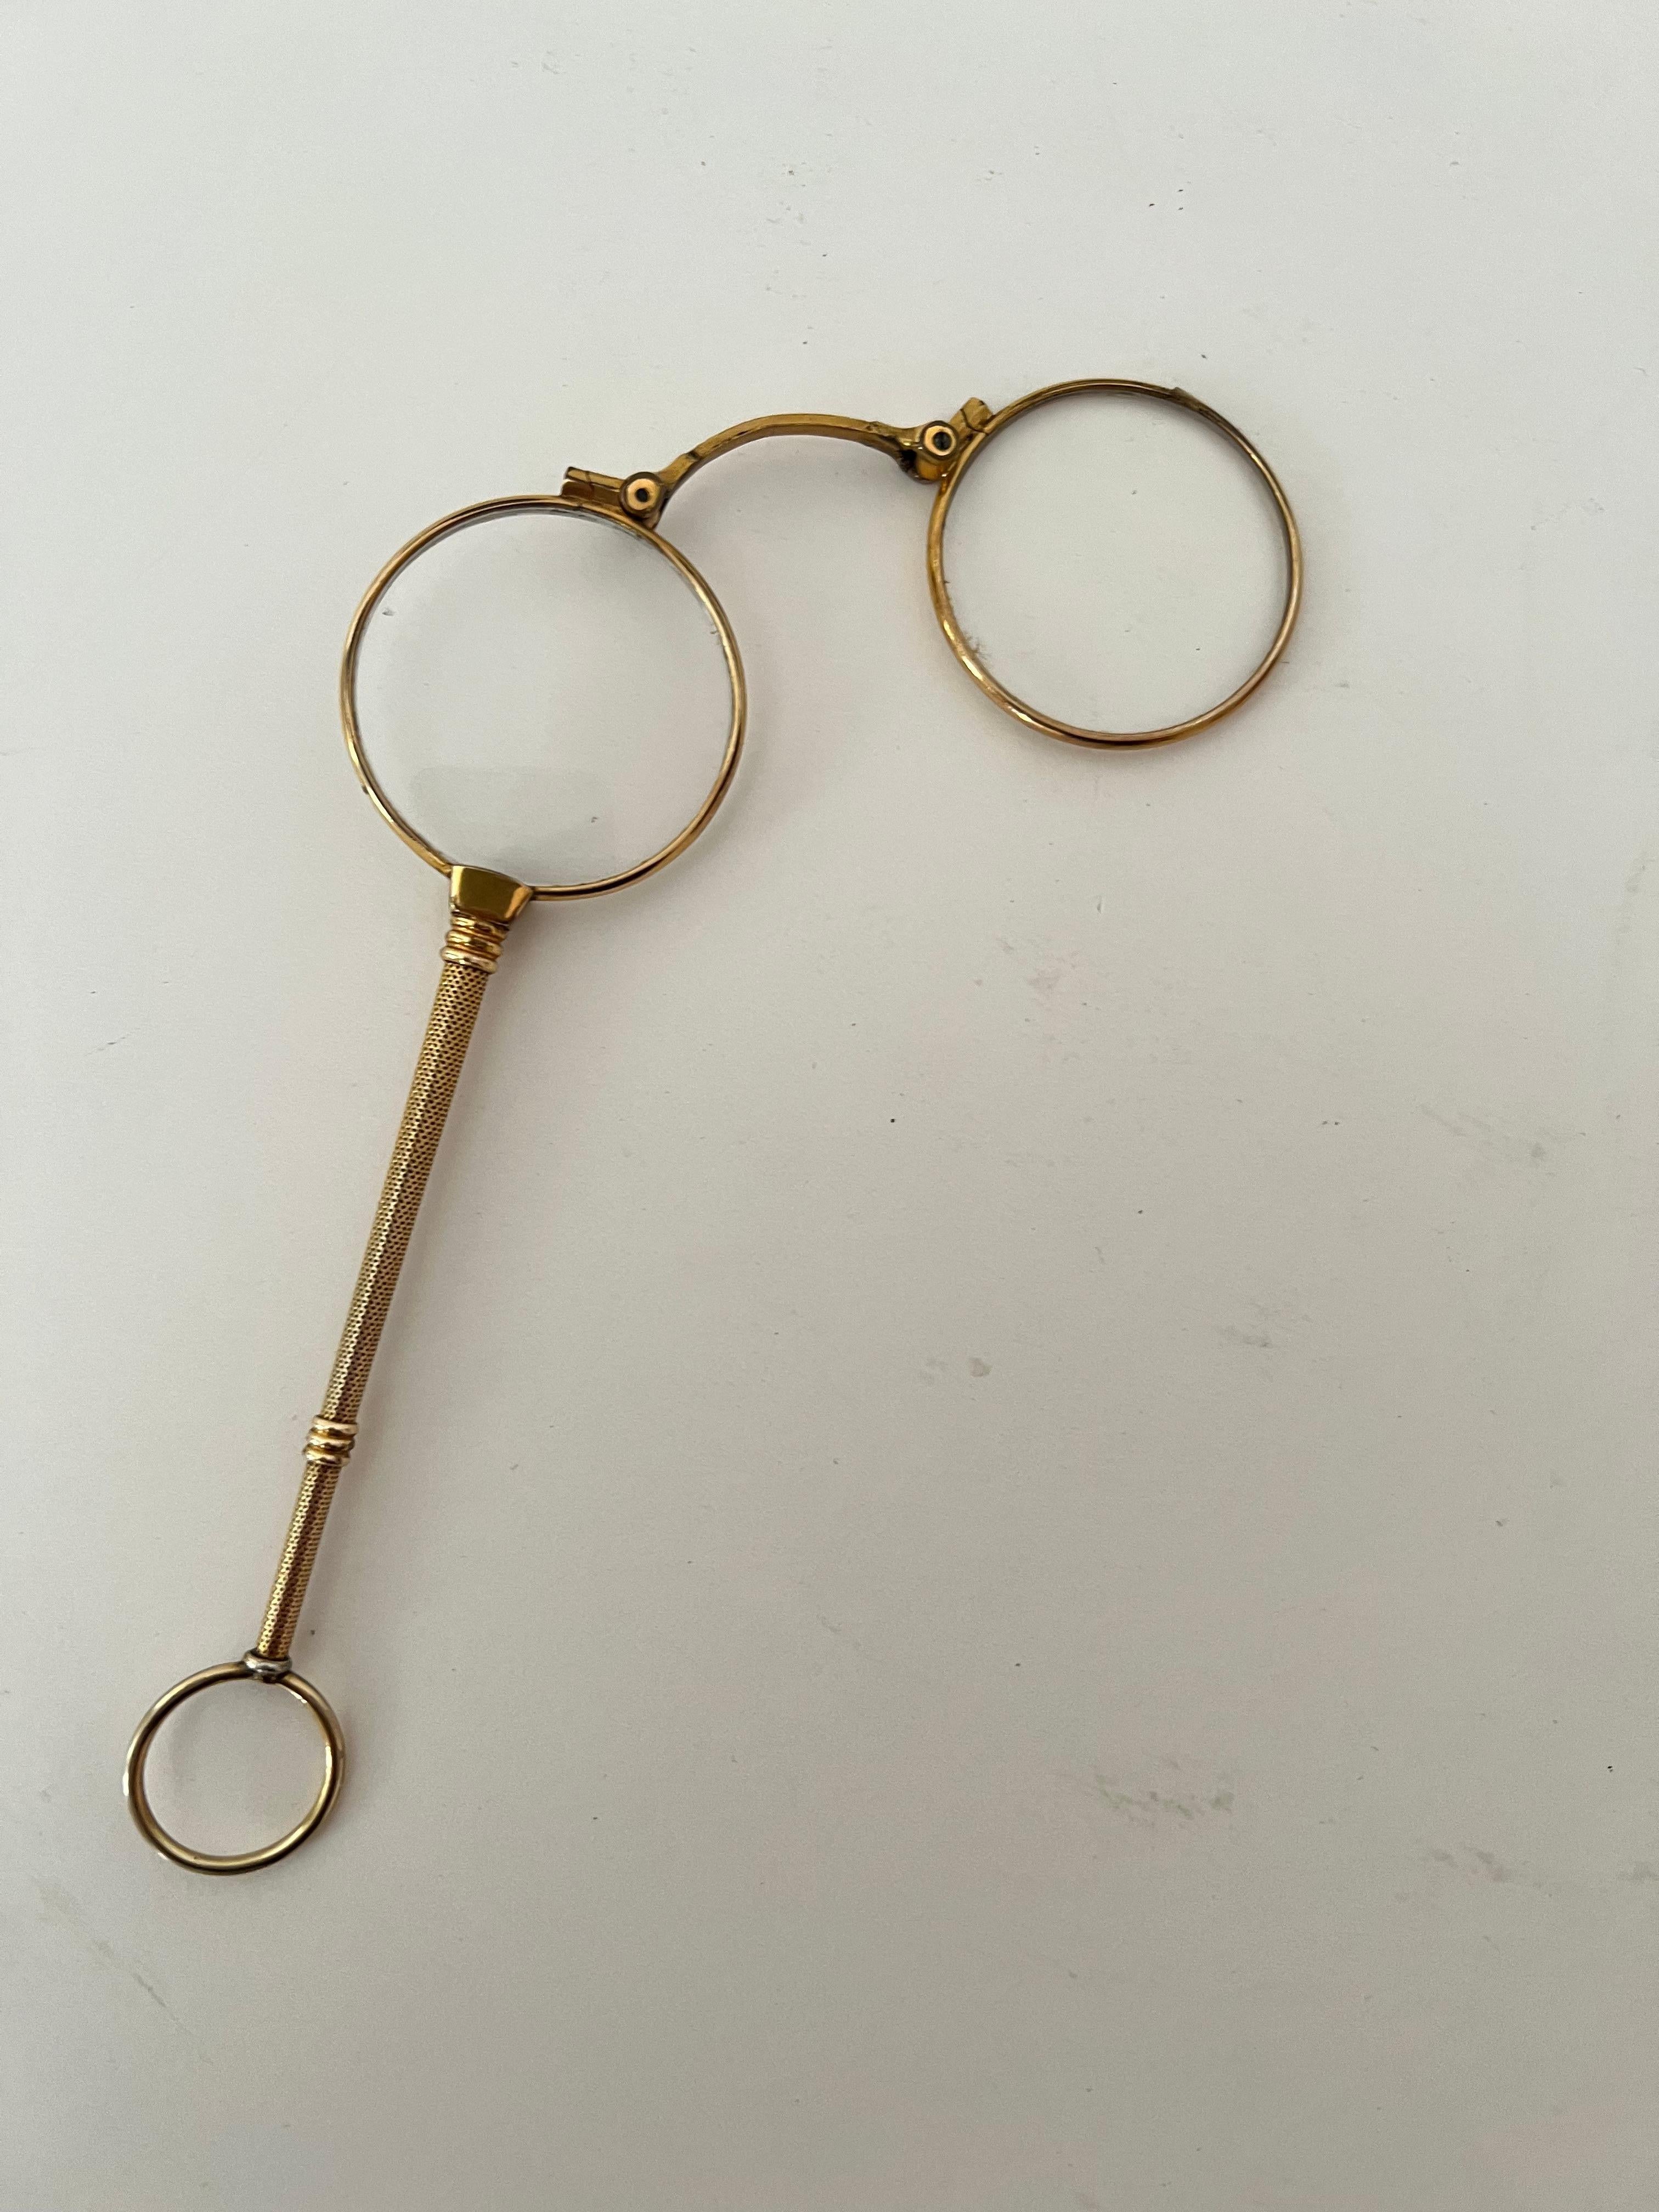 Gold Single Monocle Magnifyer Opening into a Lorgnette For Sale 1